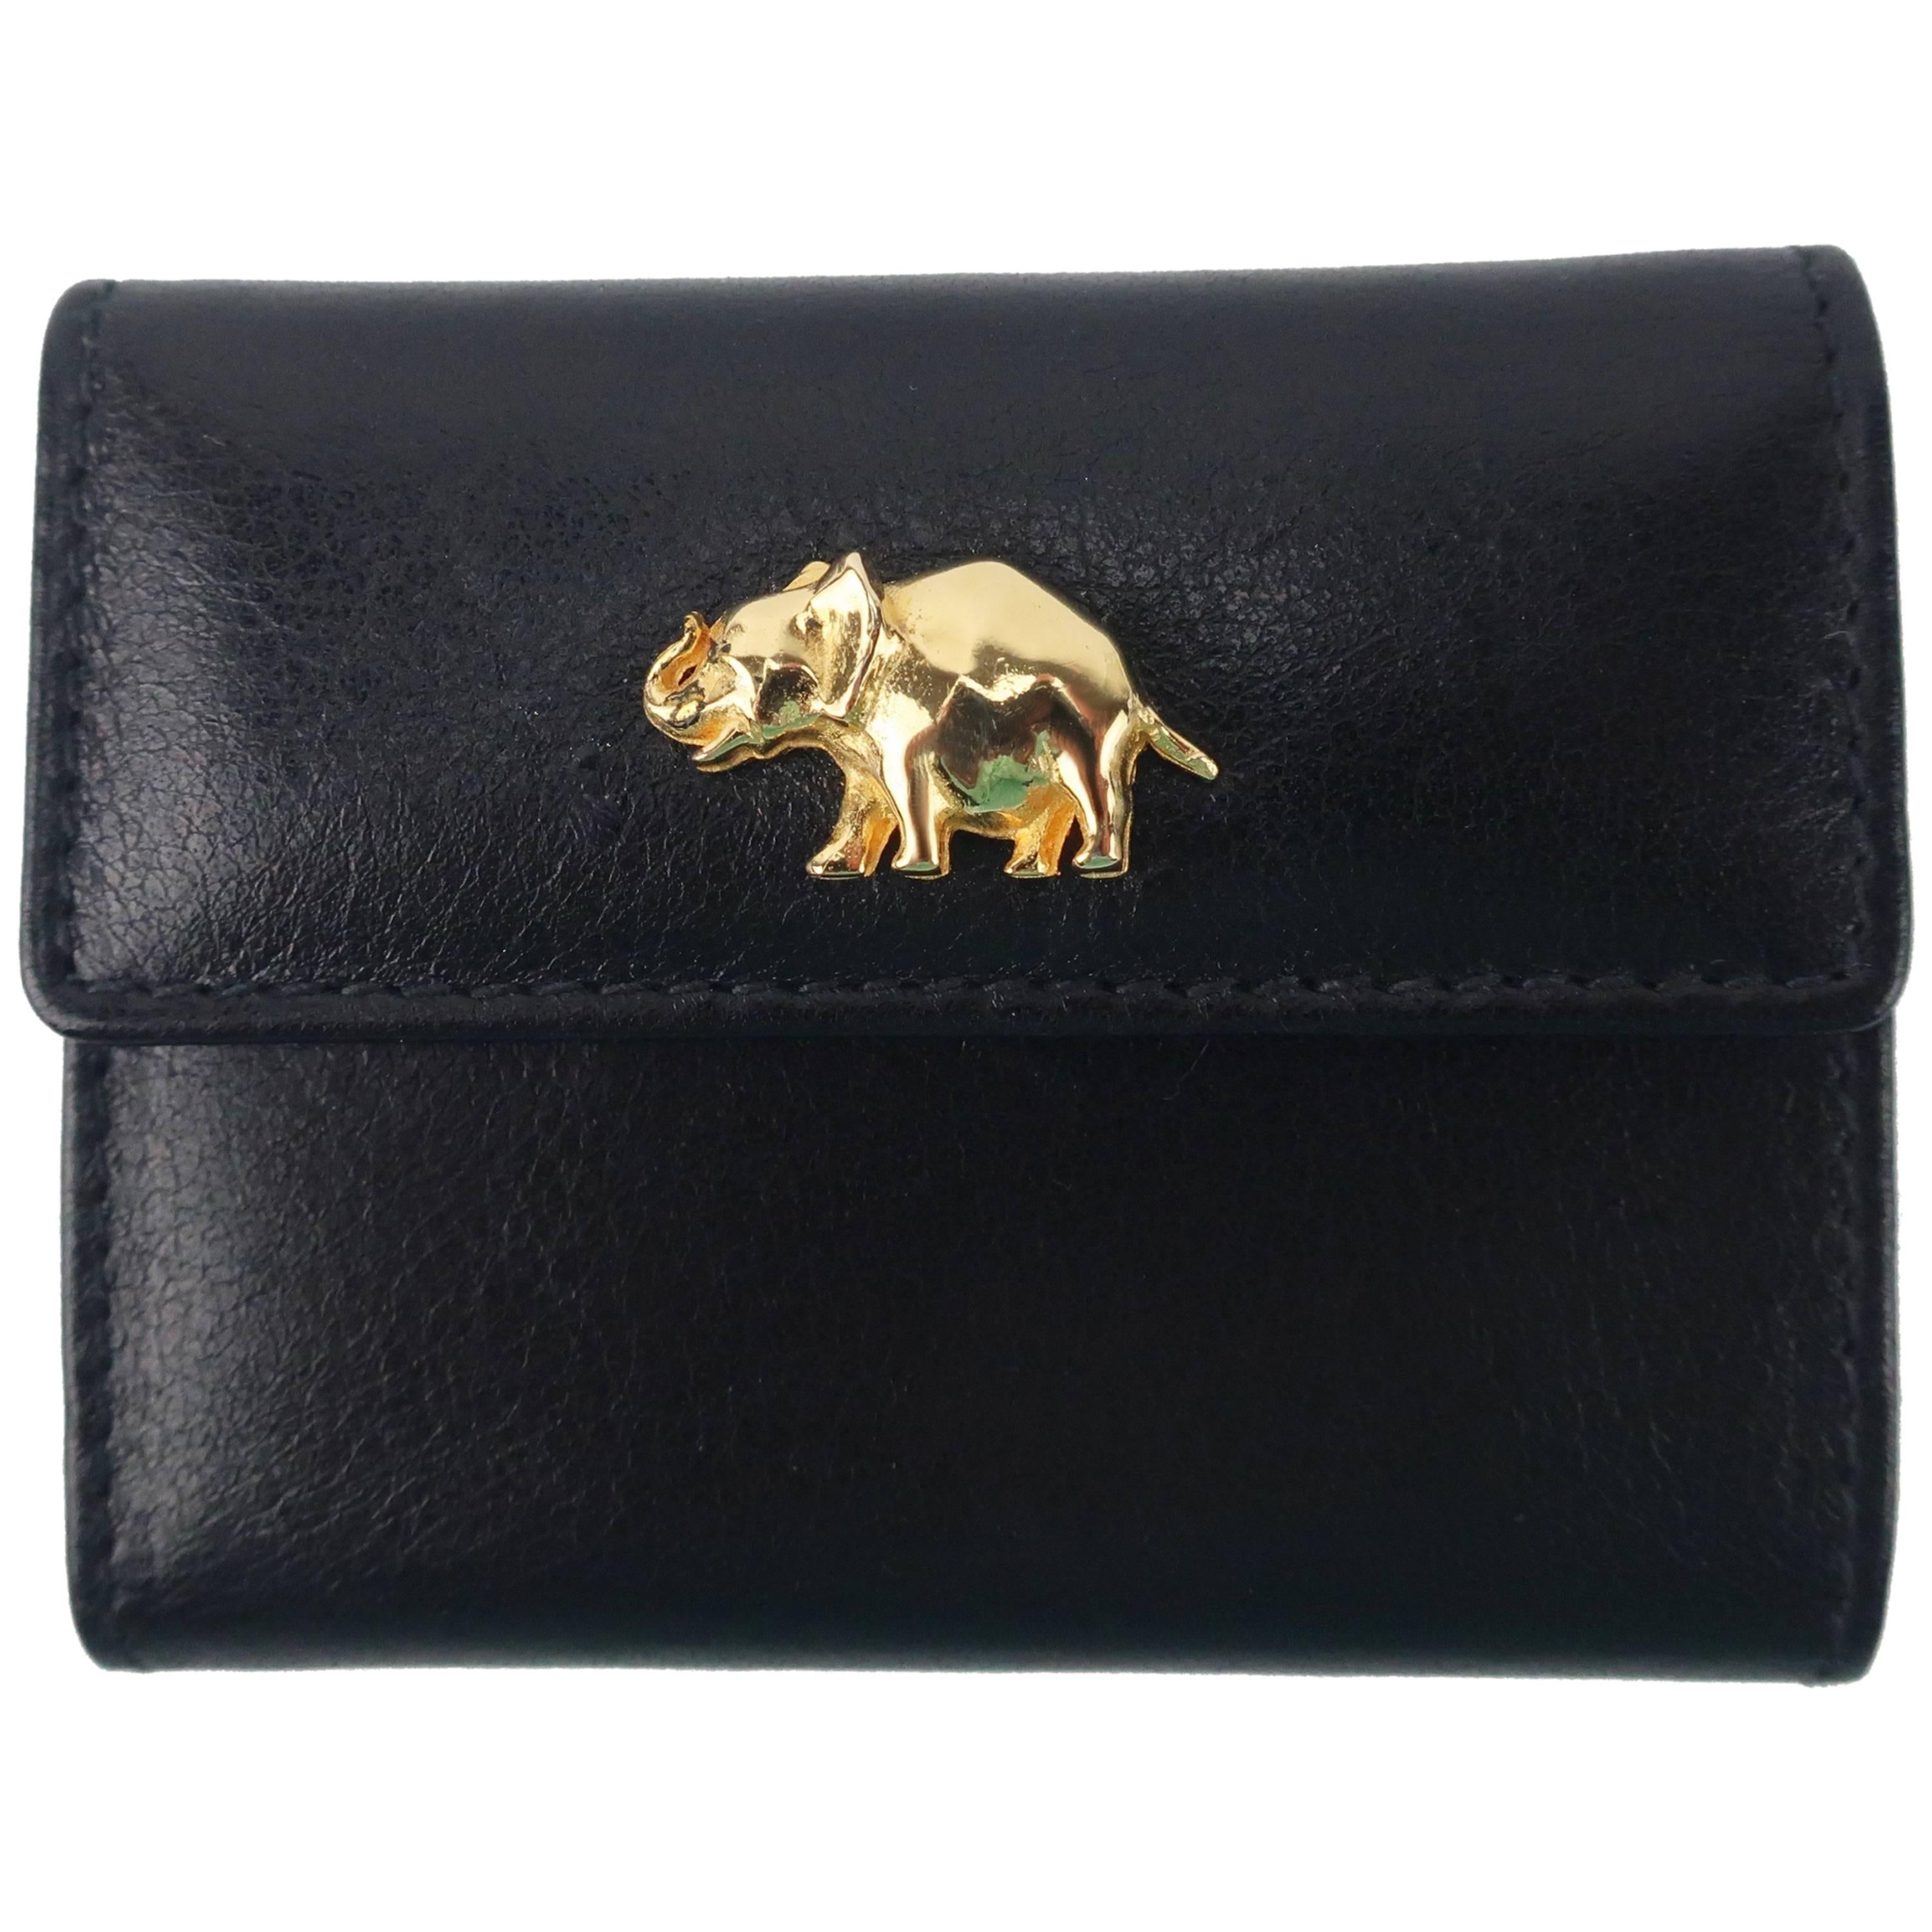 1980's Judith Leiber Black Leather Wallet With Elephant Charm